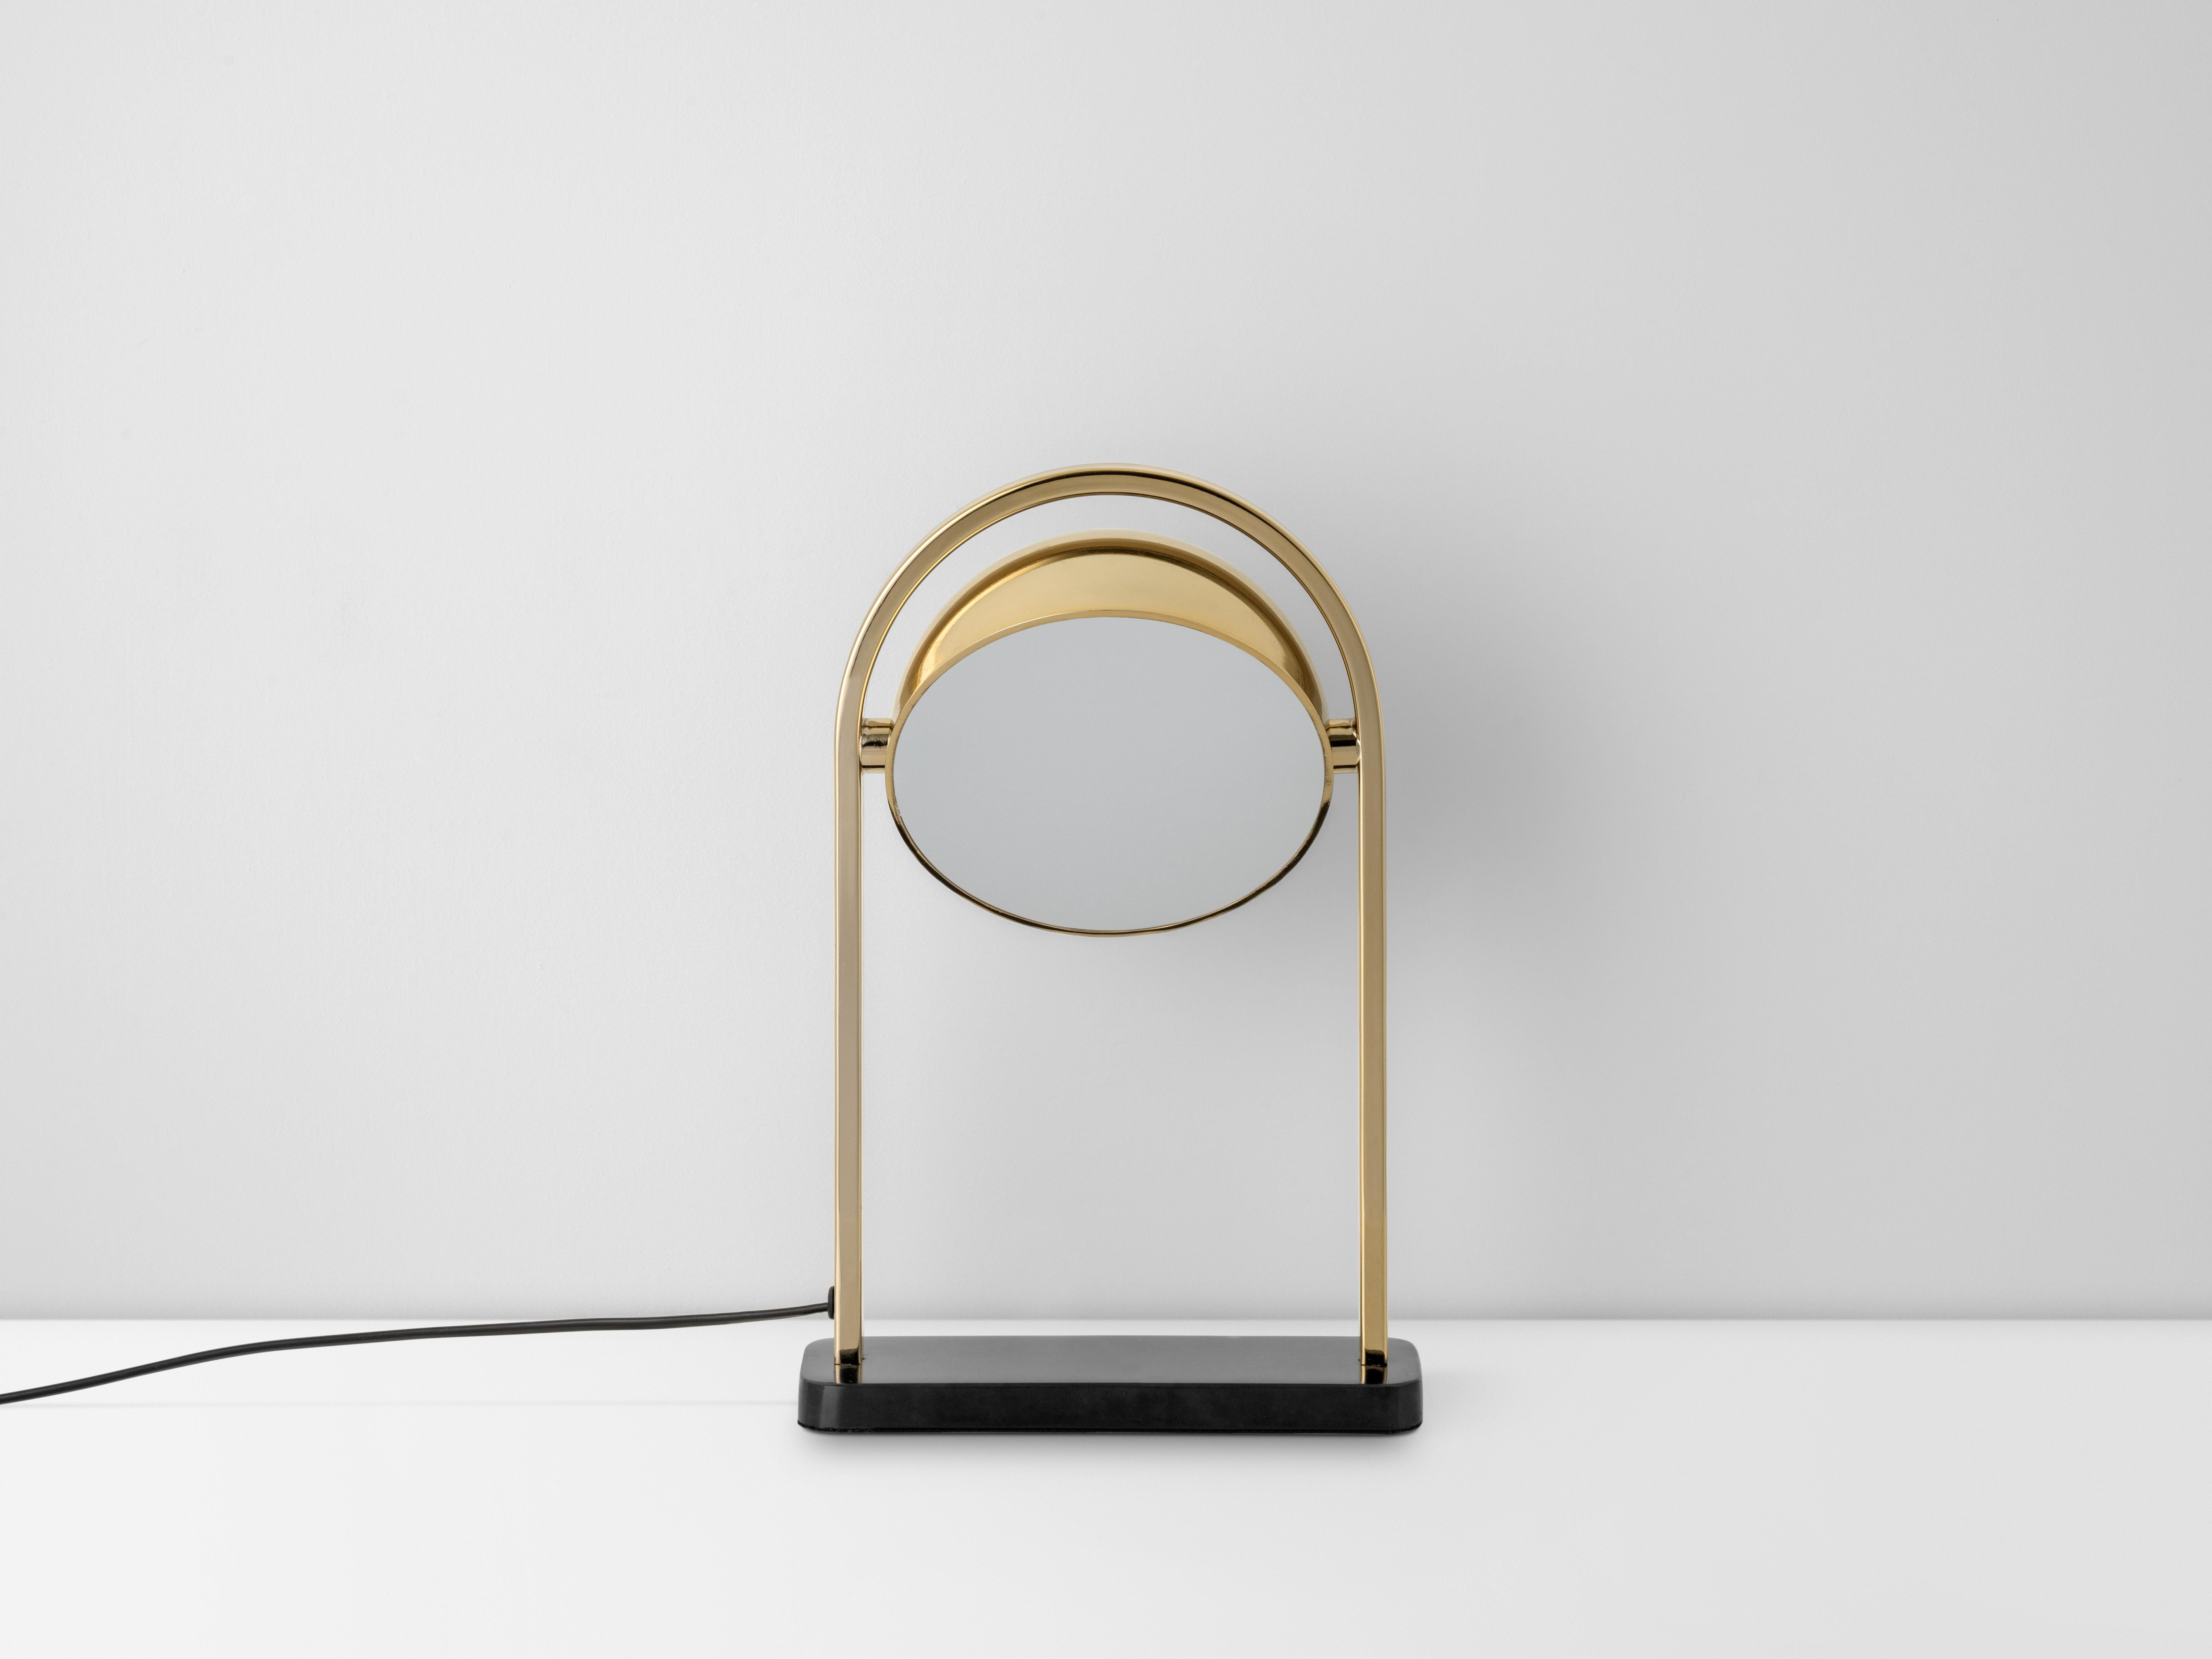 The striking brass LED dome table lamp features an arched metal frame that supports a dome shade that can be angled to your preferred direction of light. Finished off with a sleek and stylish black marble base, this striking investment table lamp is